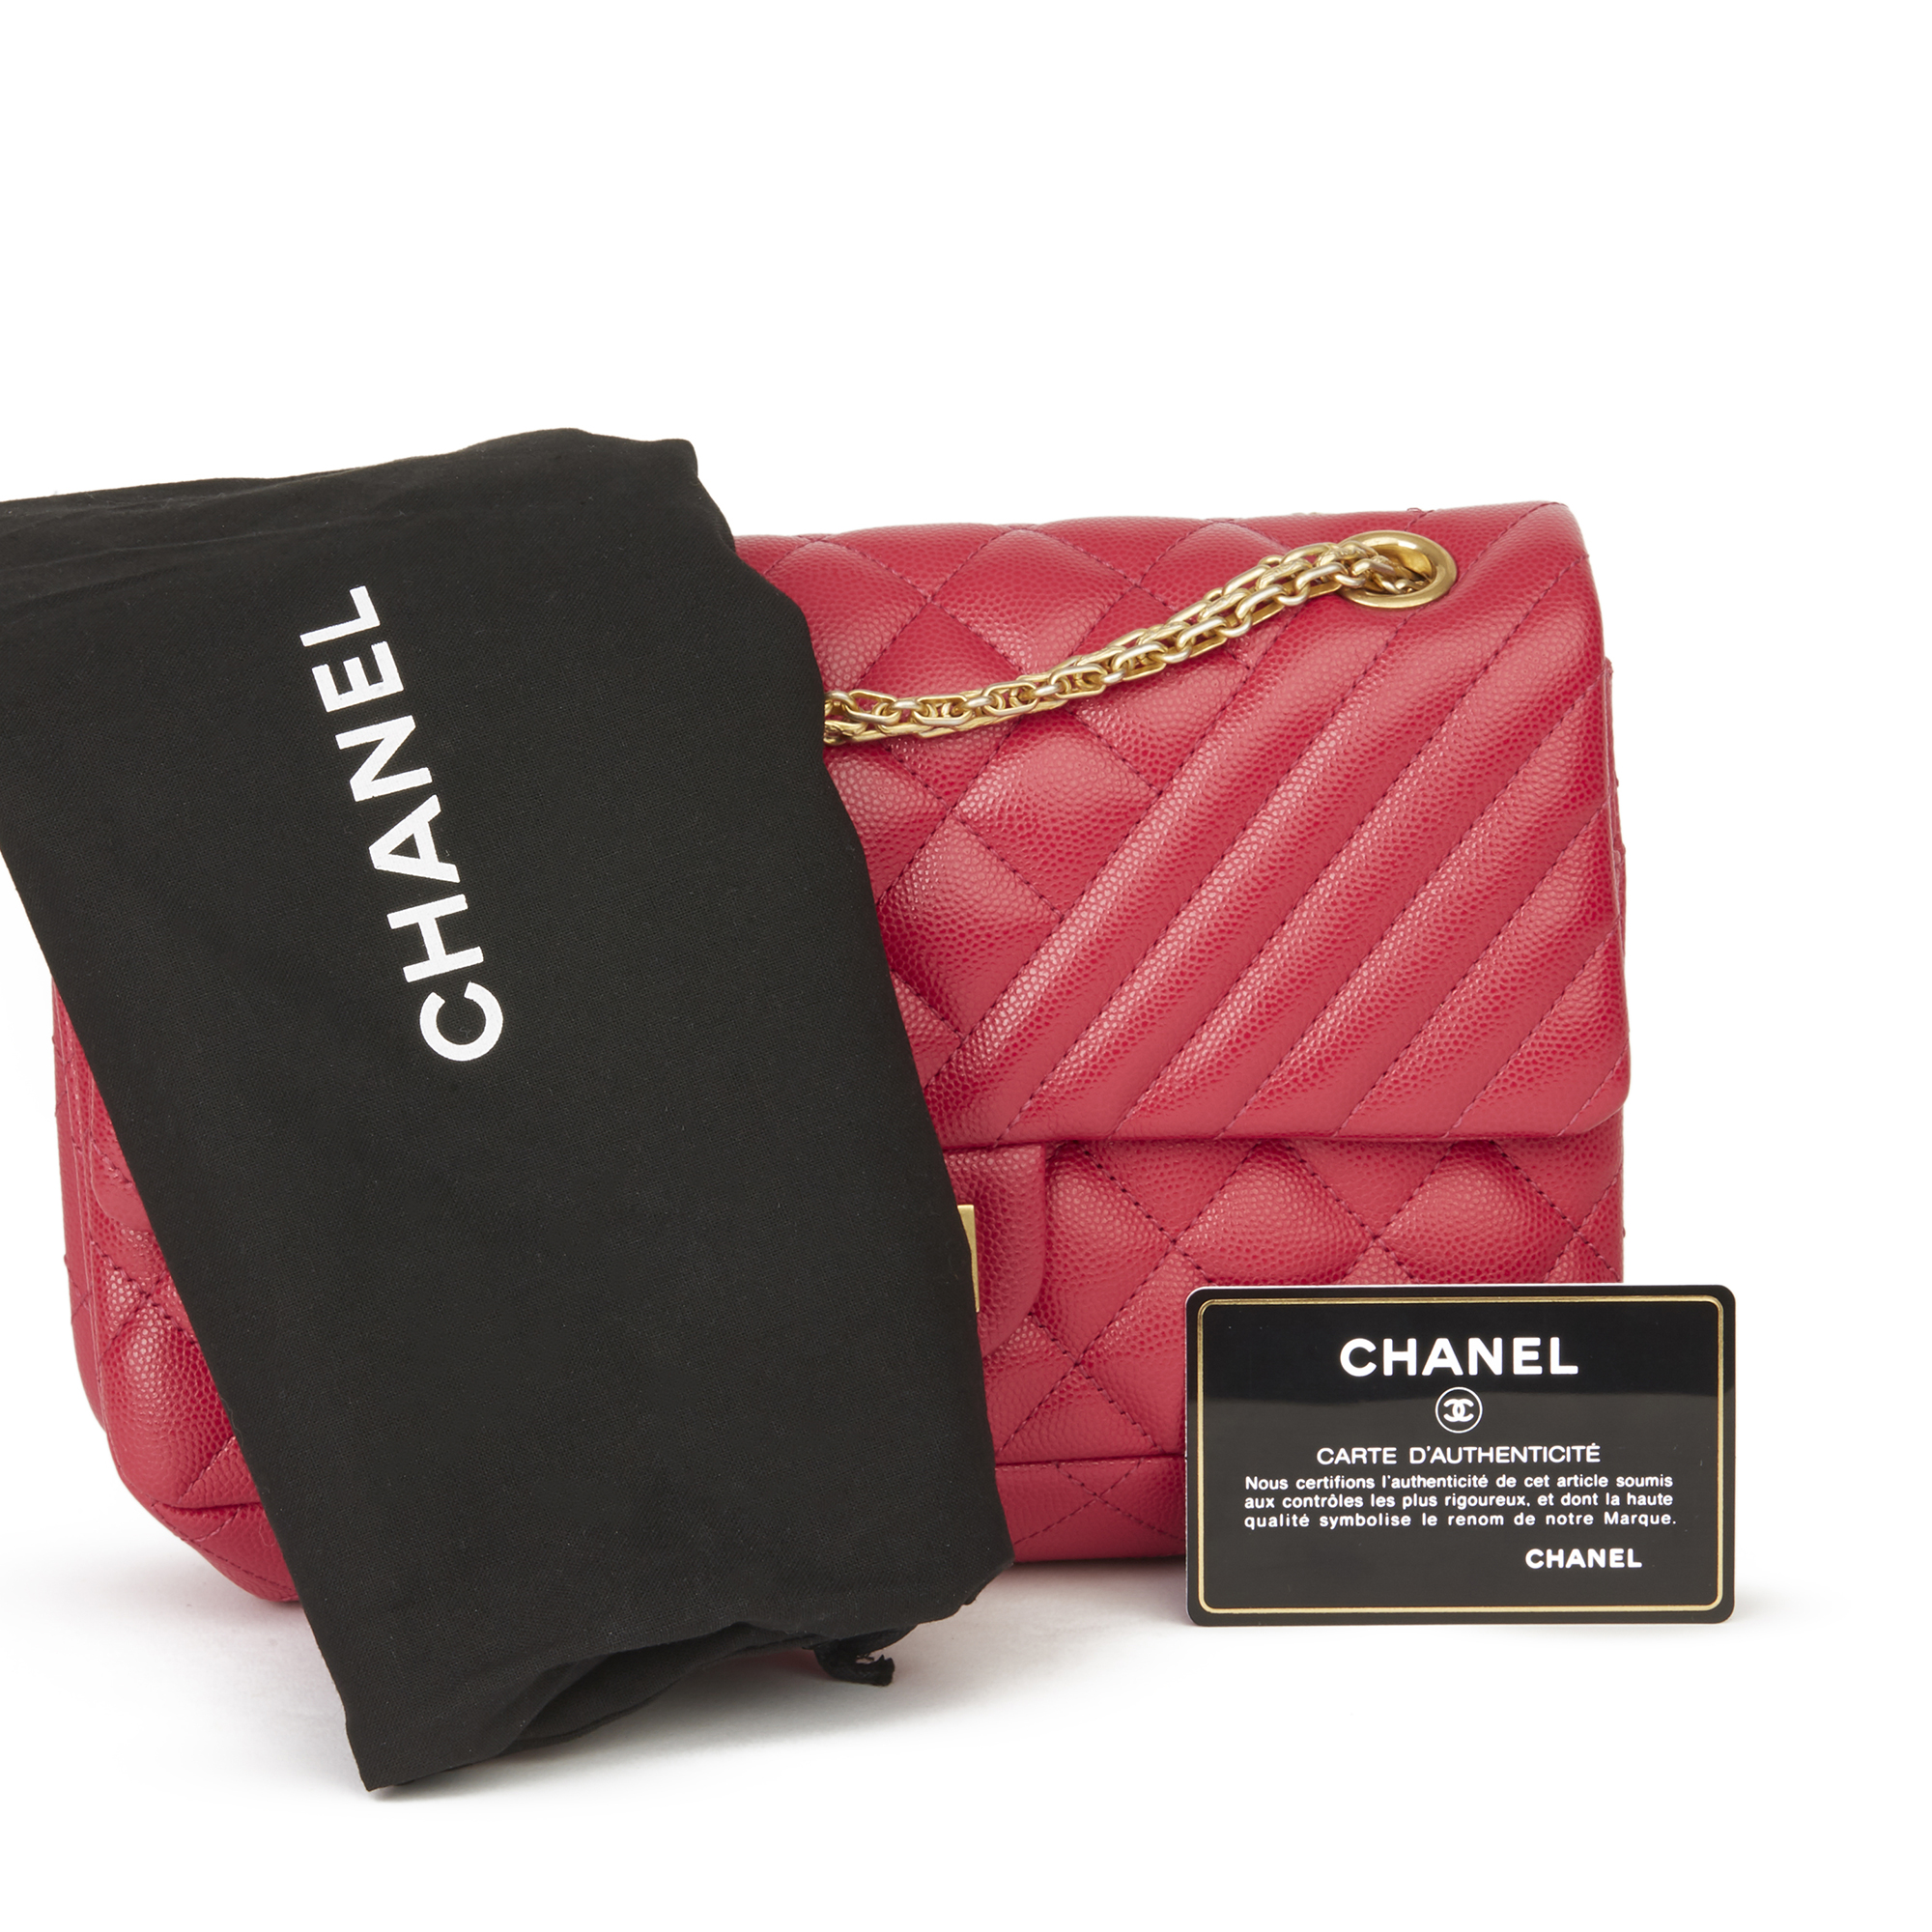 Chanel 2.55 Reissue Double Flap Bag - Image 3 of 12